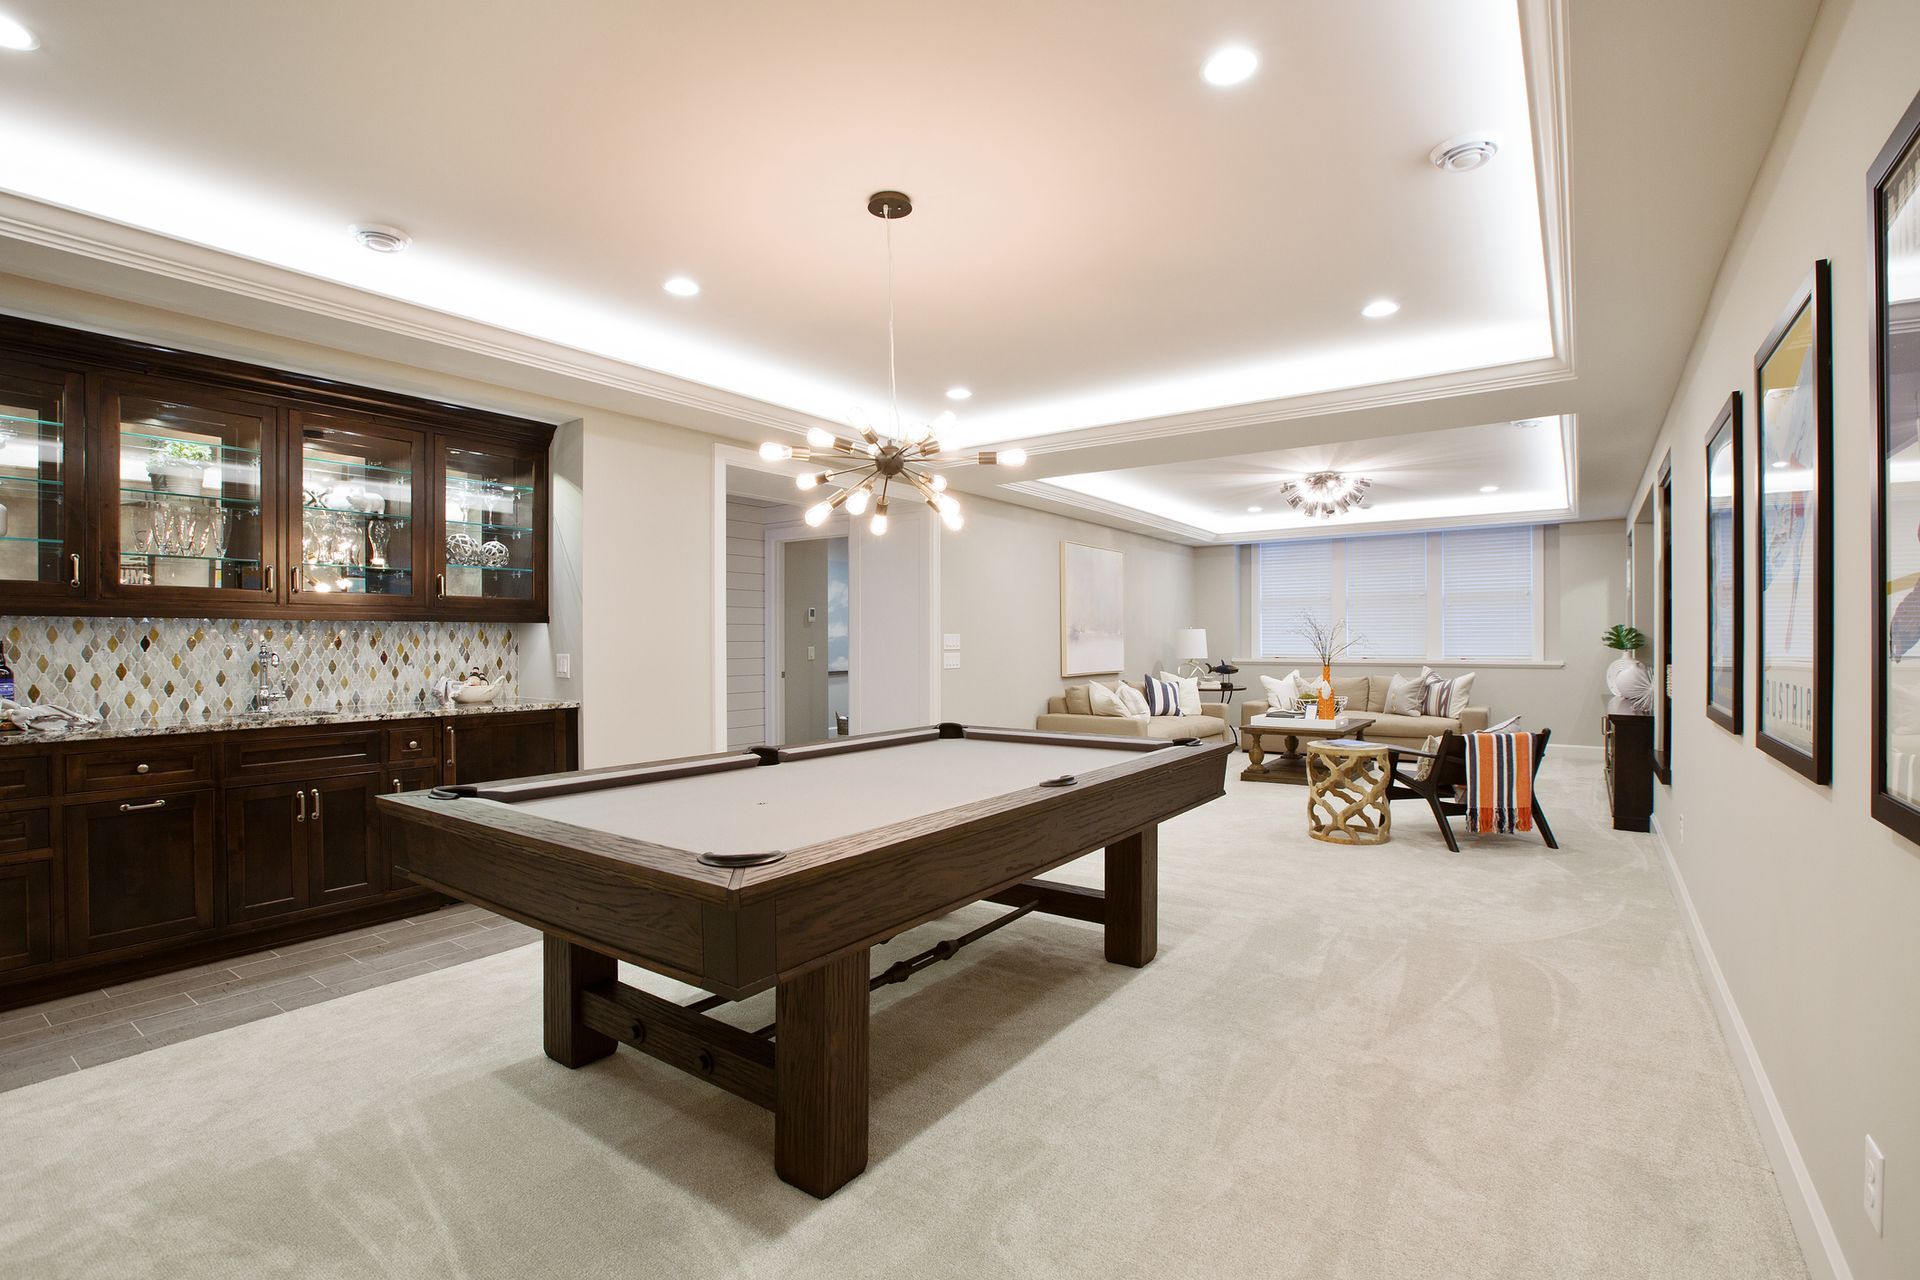 Pool Table in the Middle of a Living Room — Boston, MA — Boston Home Repair & Management, LLC